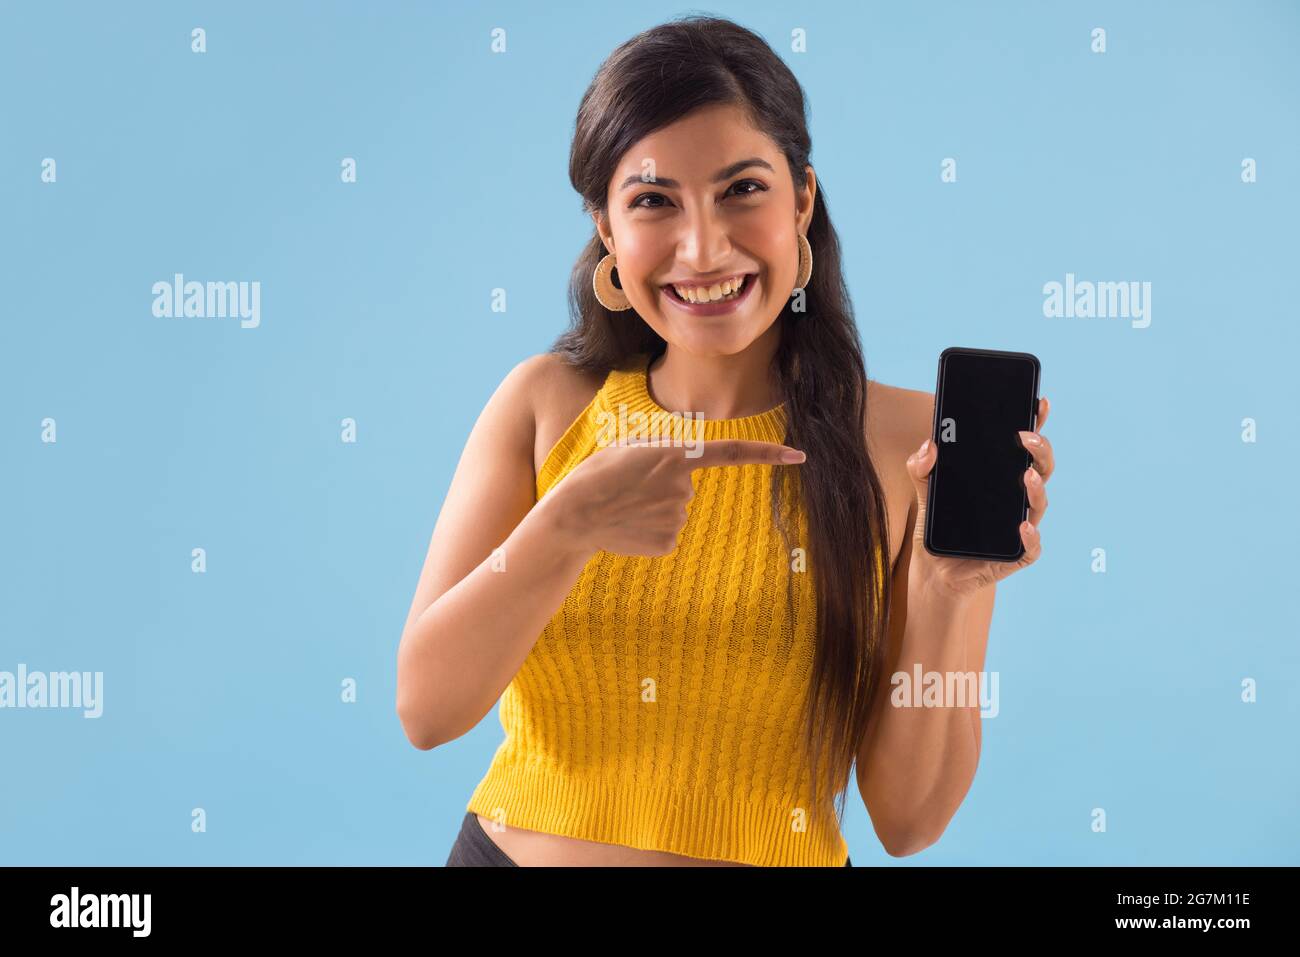 A young woman pointing towards her mobile phone. Stock Photo